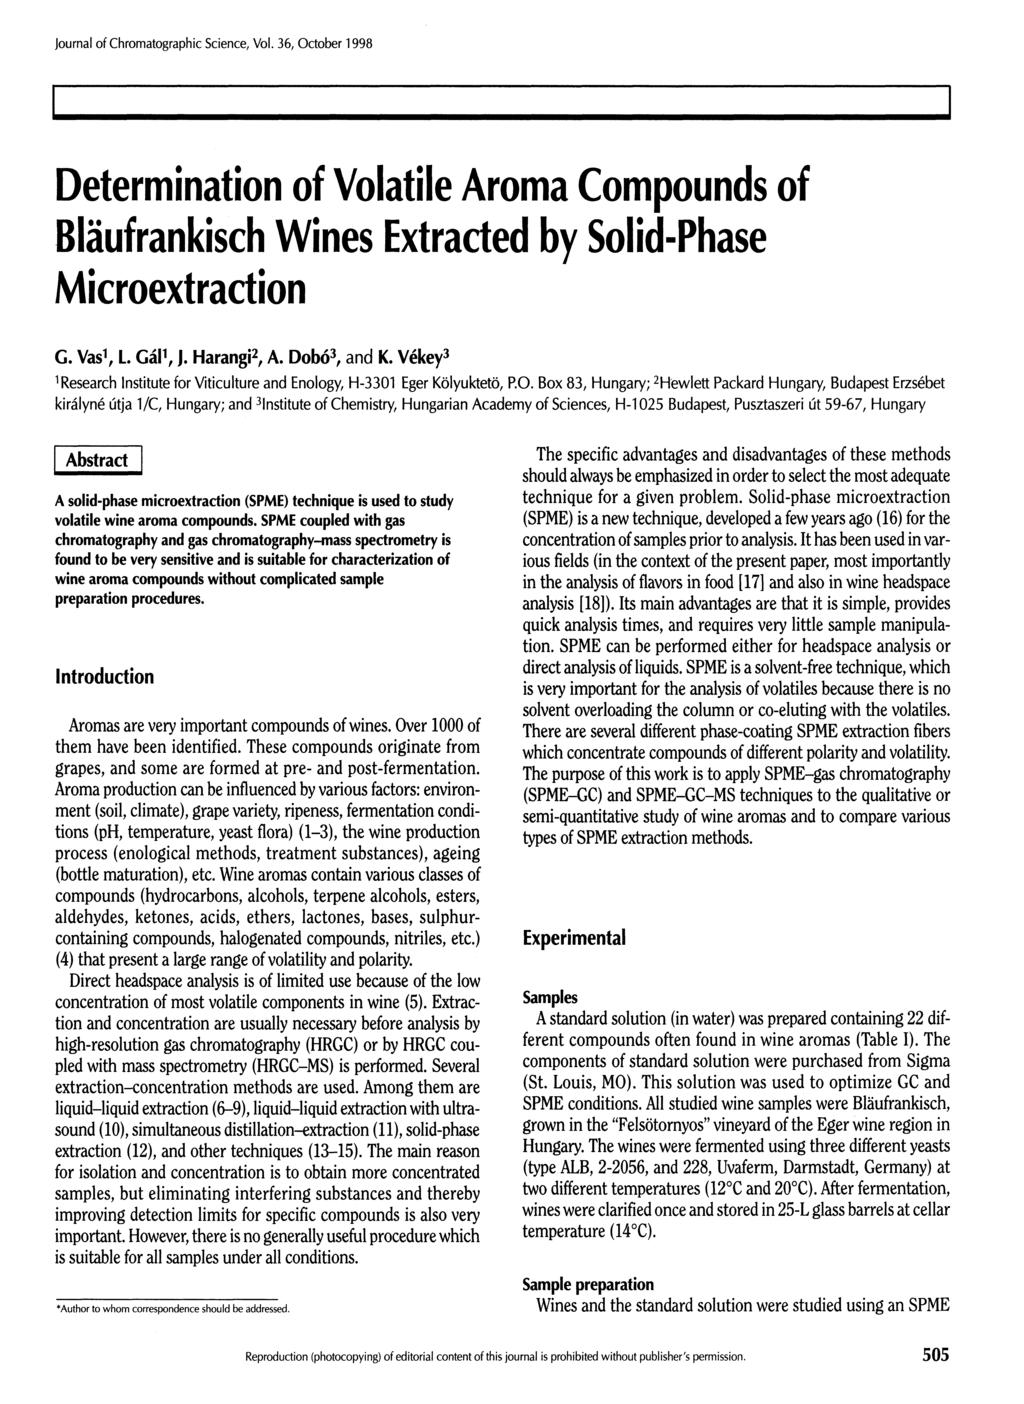 Determination of Volatile Aroma Compounds of Blaufrankisch Wines Extracted by Solid-Phase Microextraction G. Vas 1, L Gál 1, J. Harangi 2, A. Dobo 3, and K.